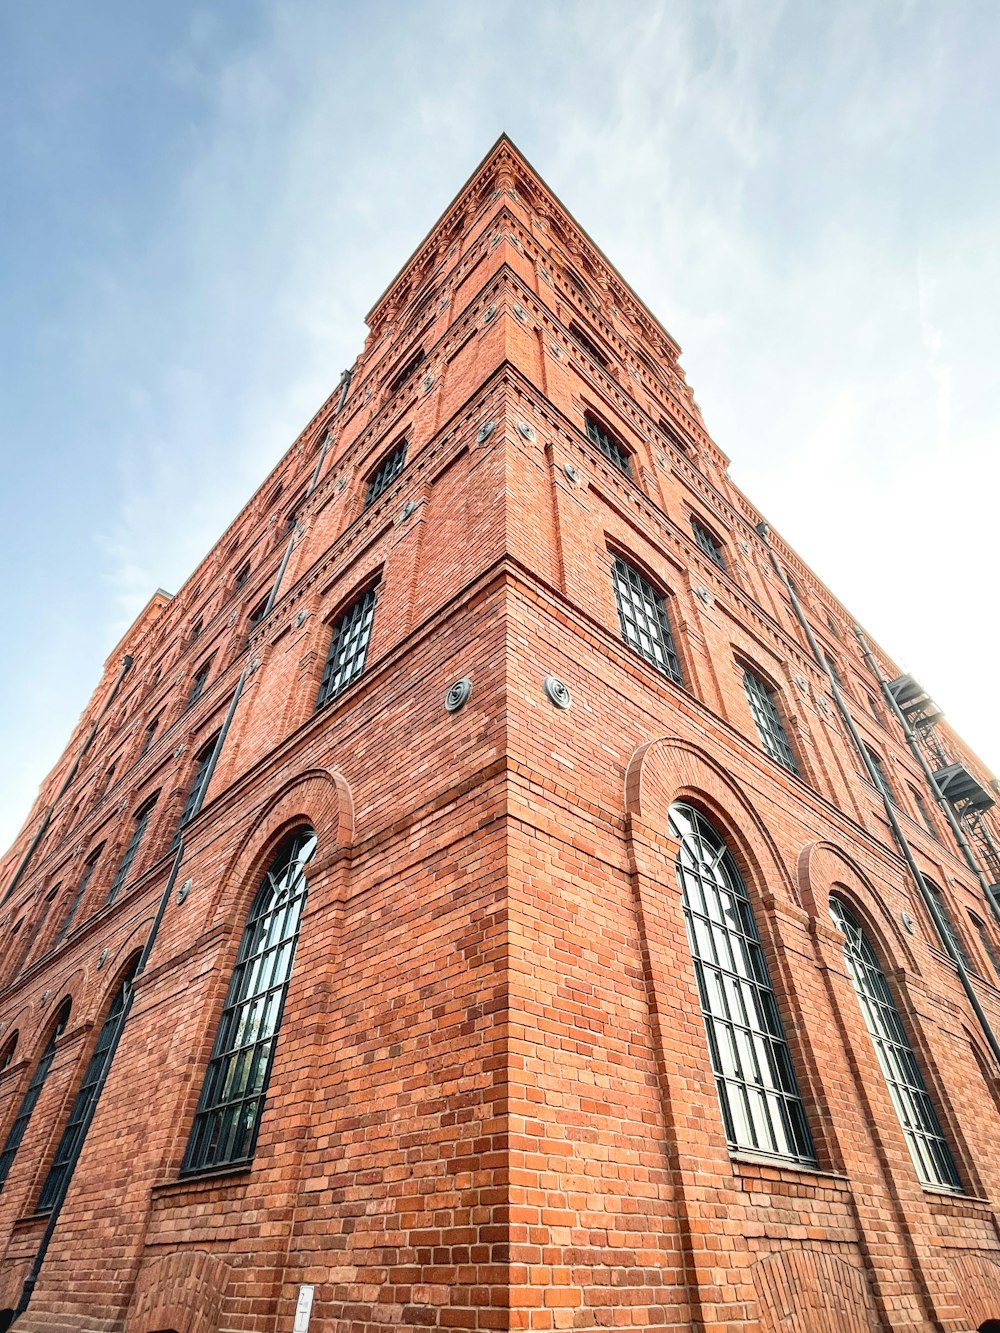 a very tall brick building with many windows